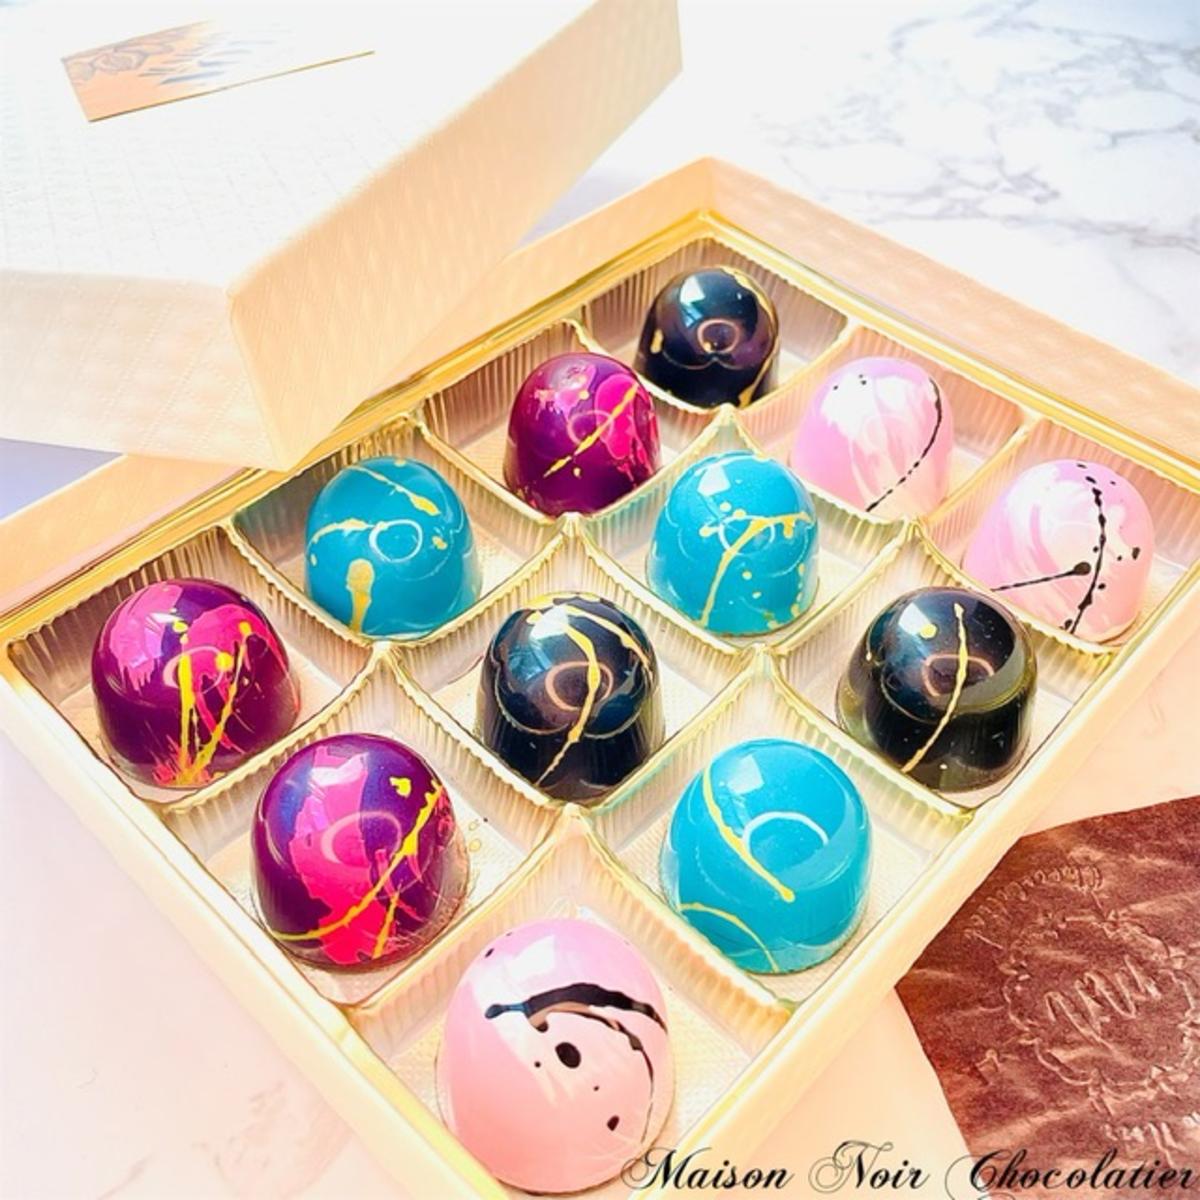 Tray of 12 chocolate bonbons in various bright colors